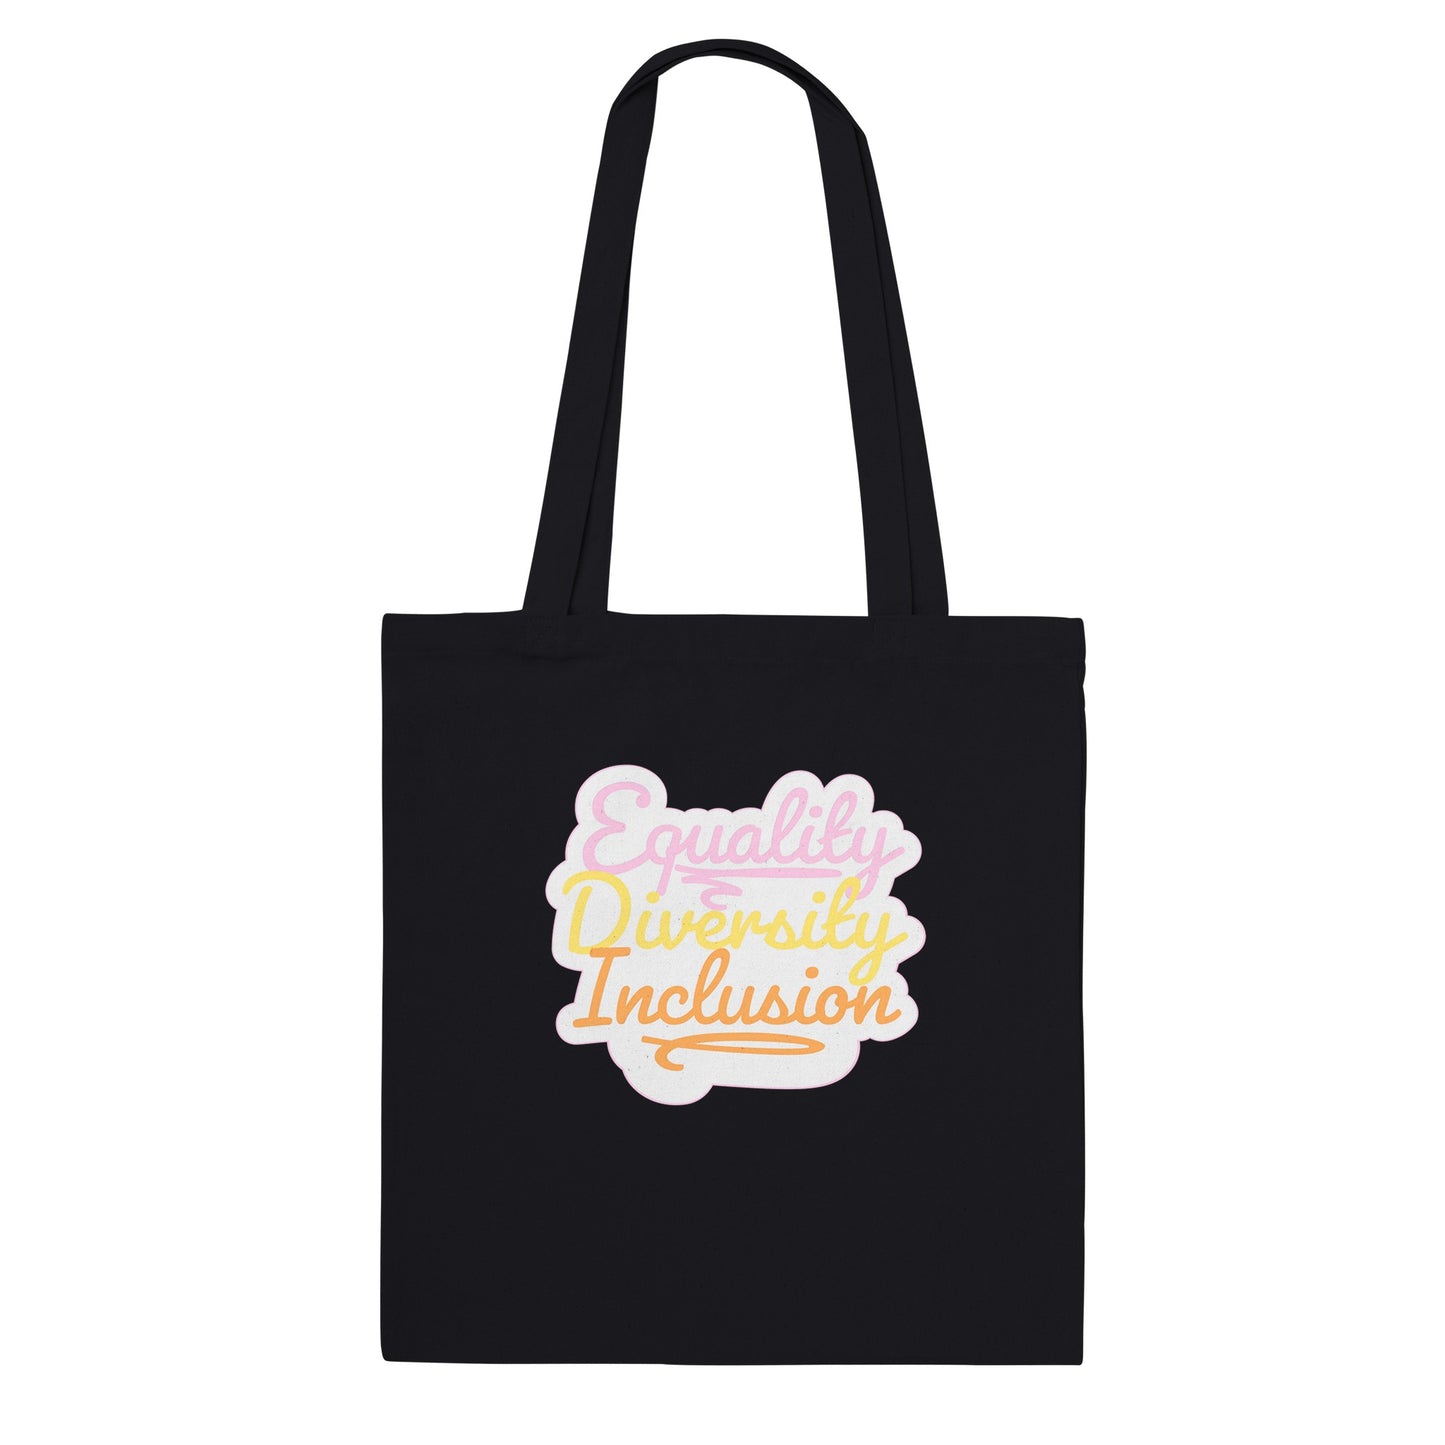 Inclusive | Equality Diversity Inclusion | Eco Tote Bag